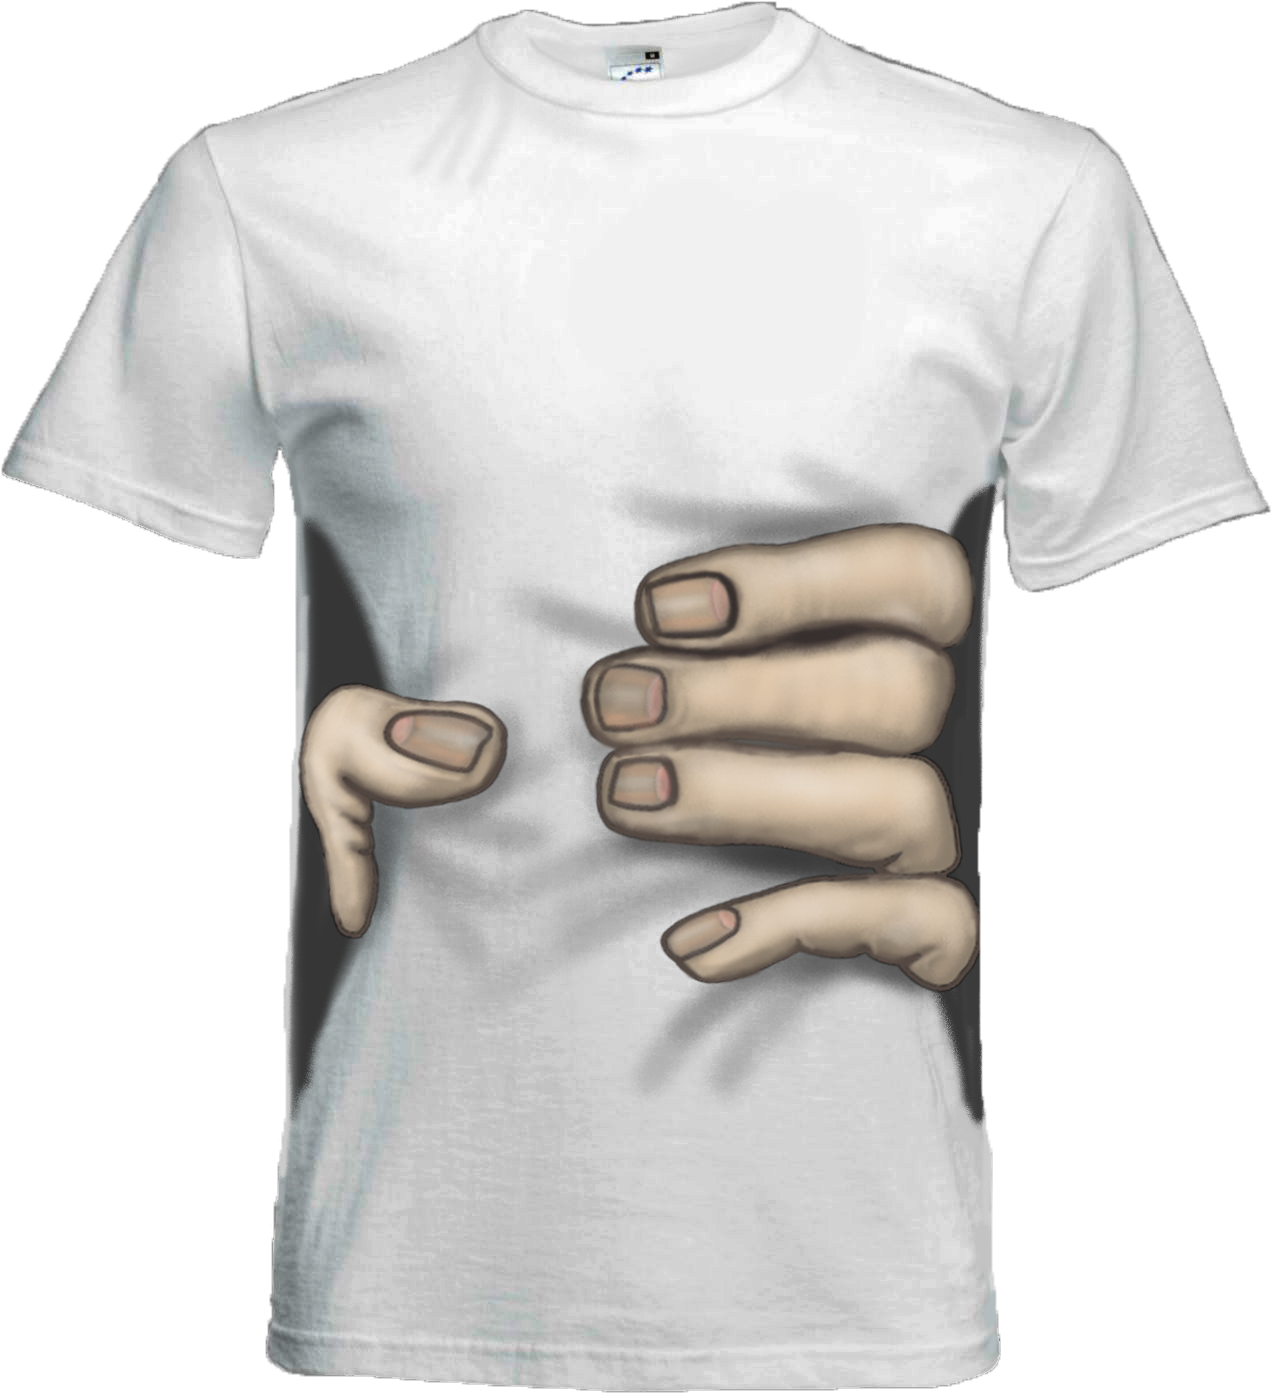 Download Funny Hand Grab T-shirt In Any Size - T-shirt PNG Image with ...